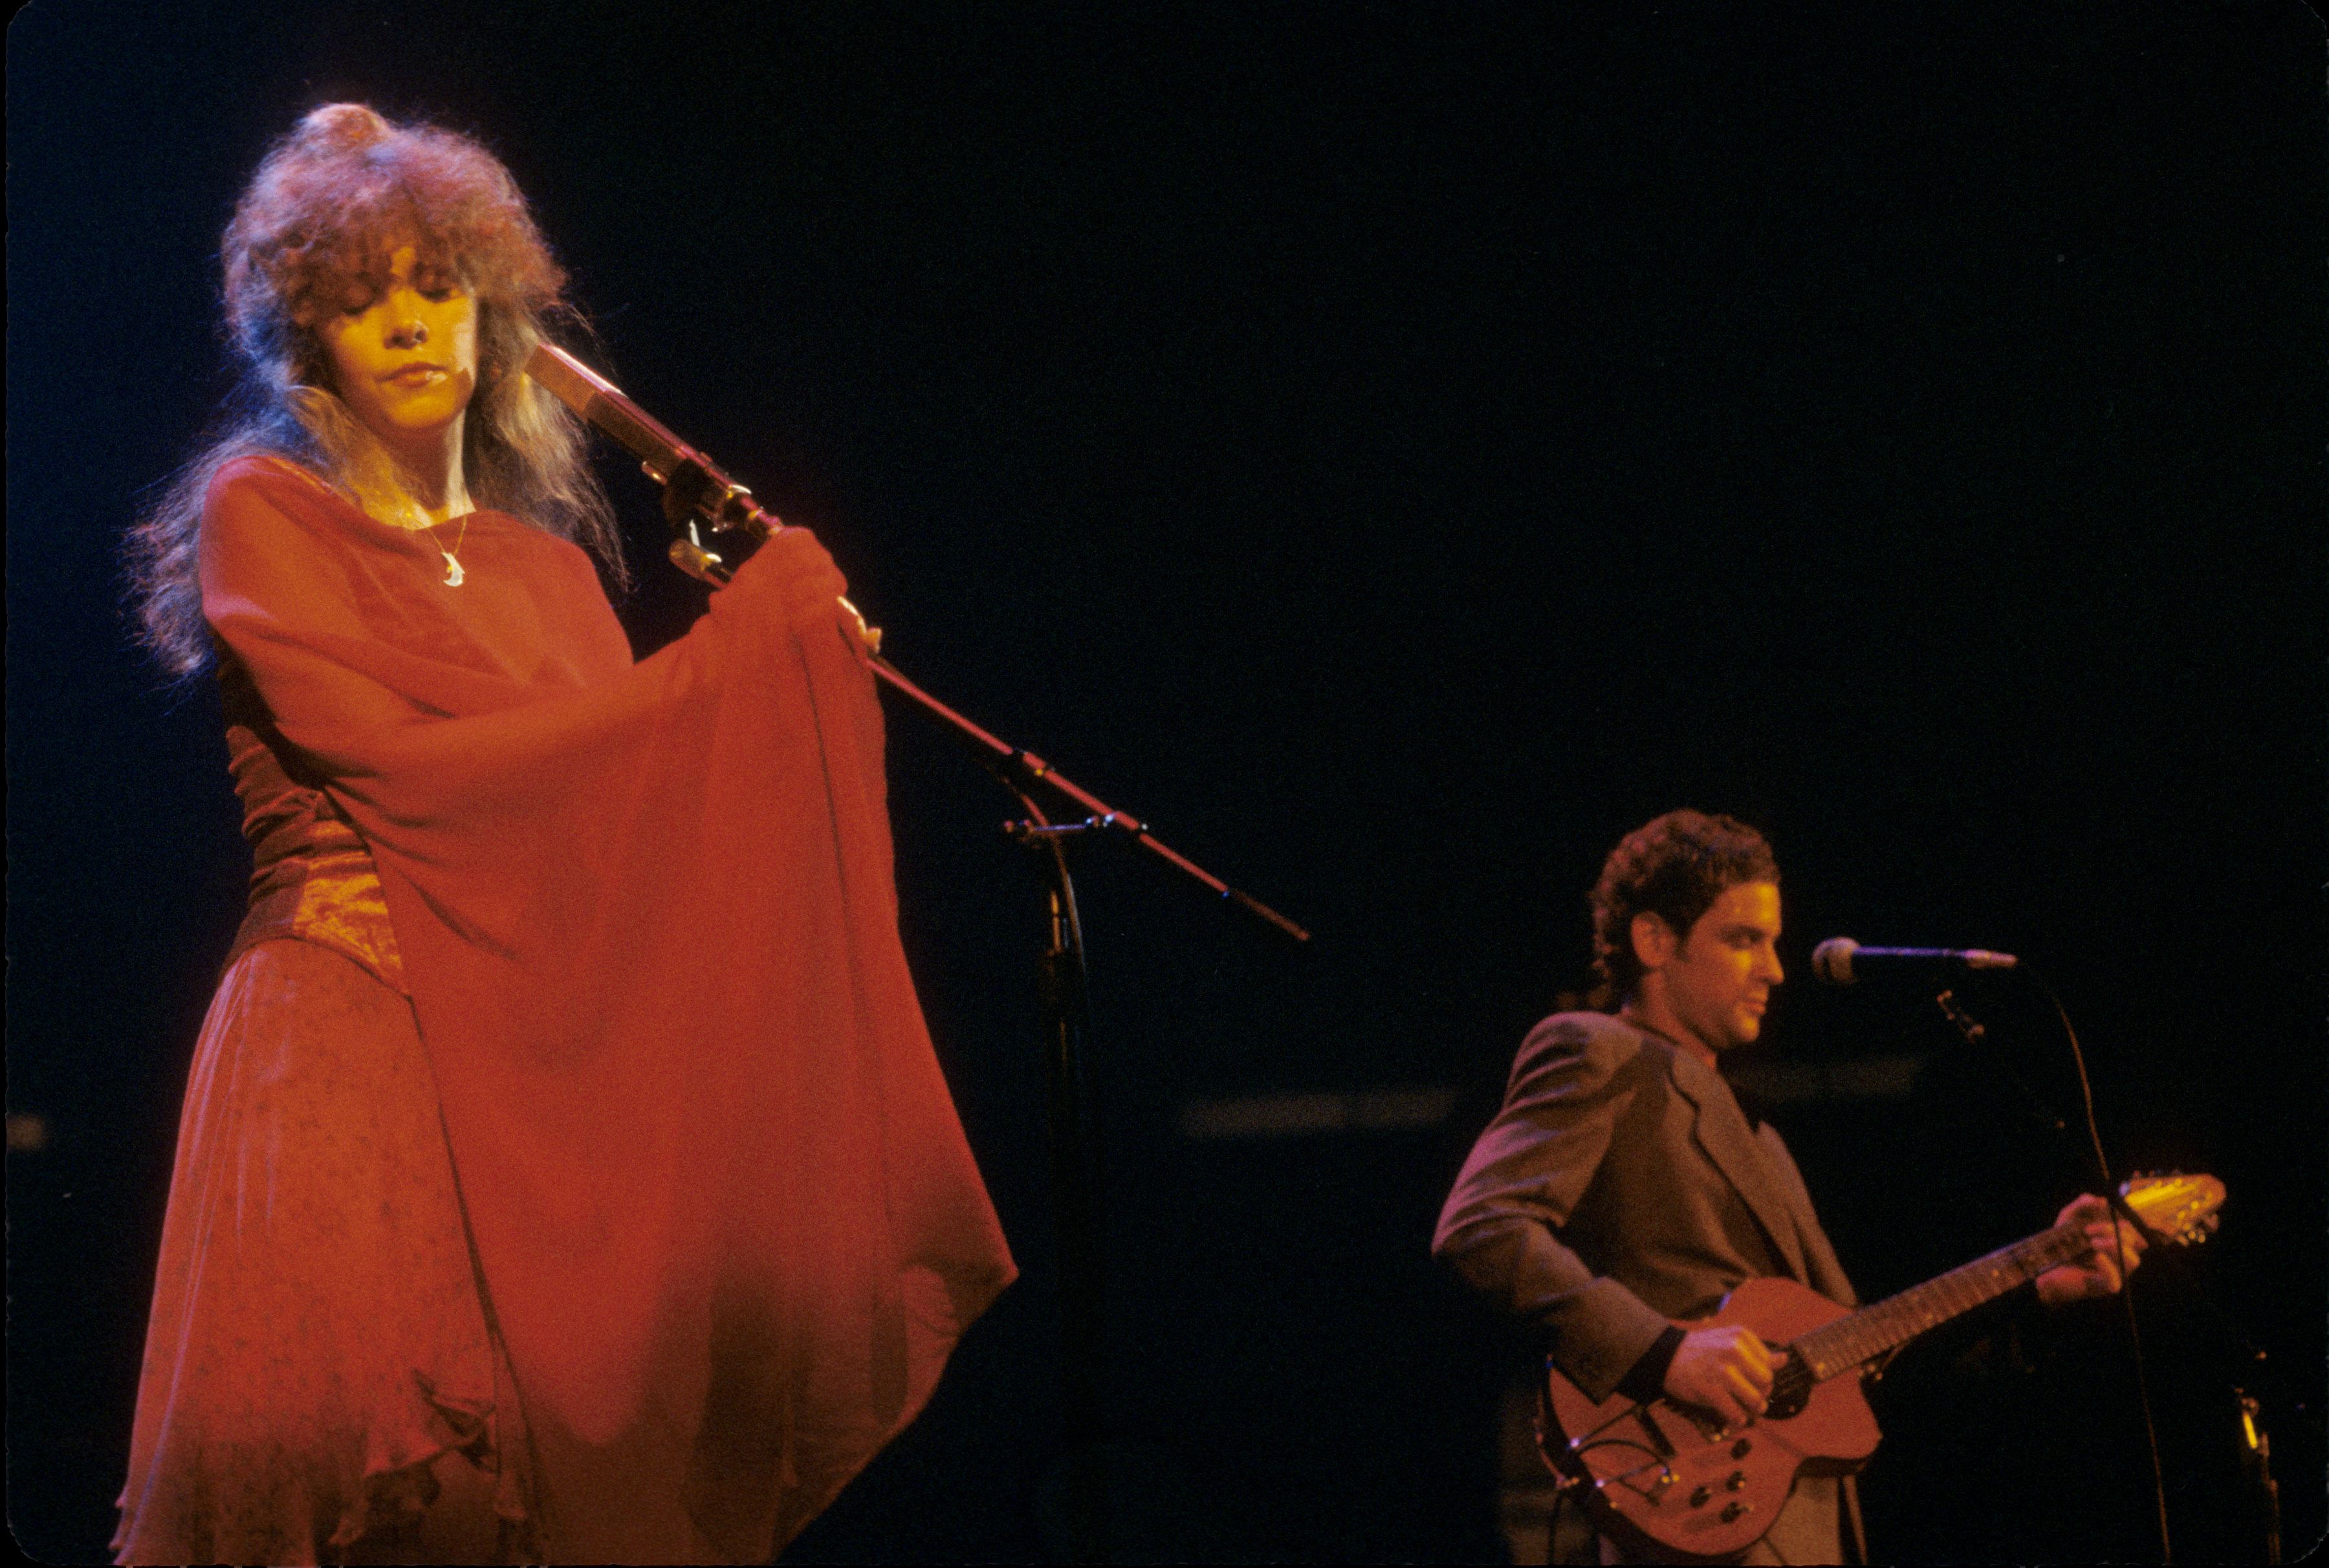 Stevie Nicks wears a long red dress and holds a microphone and Lindsey Buckingham plays guitar.